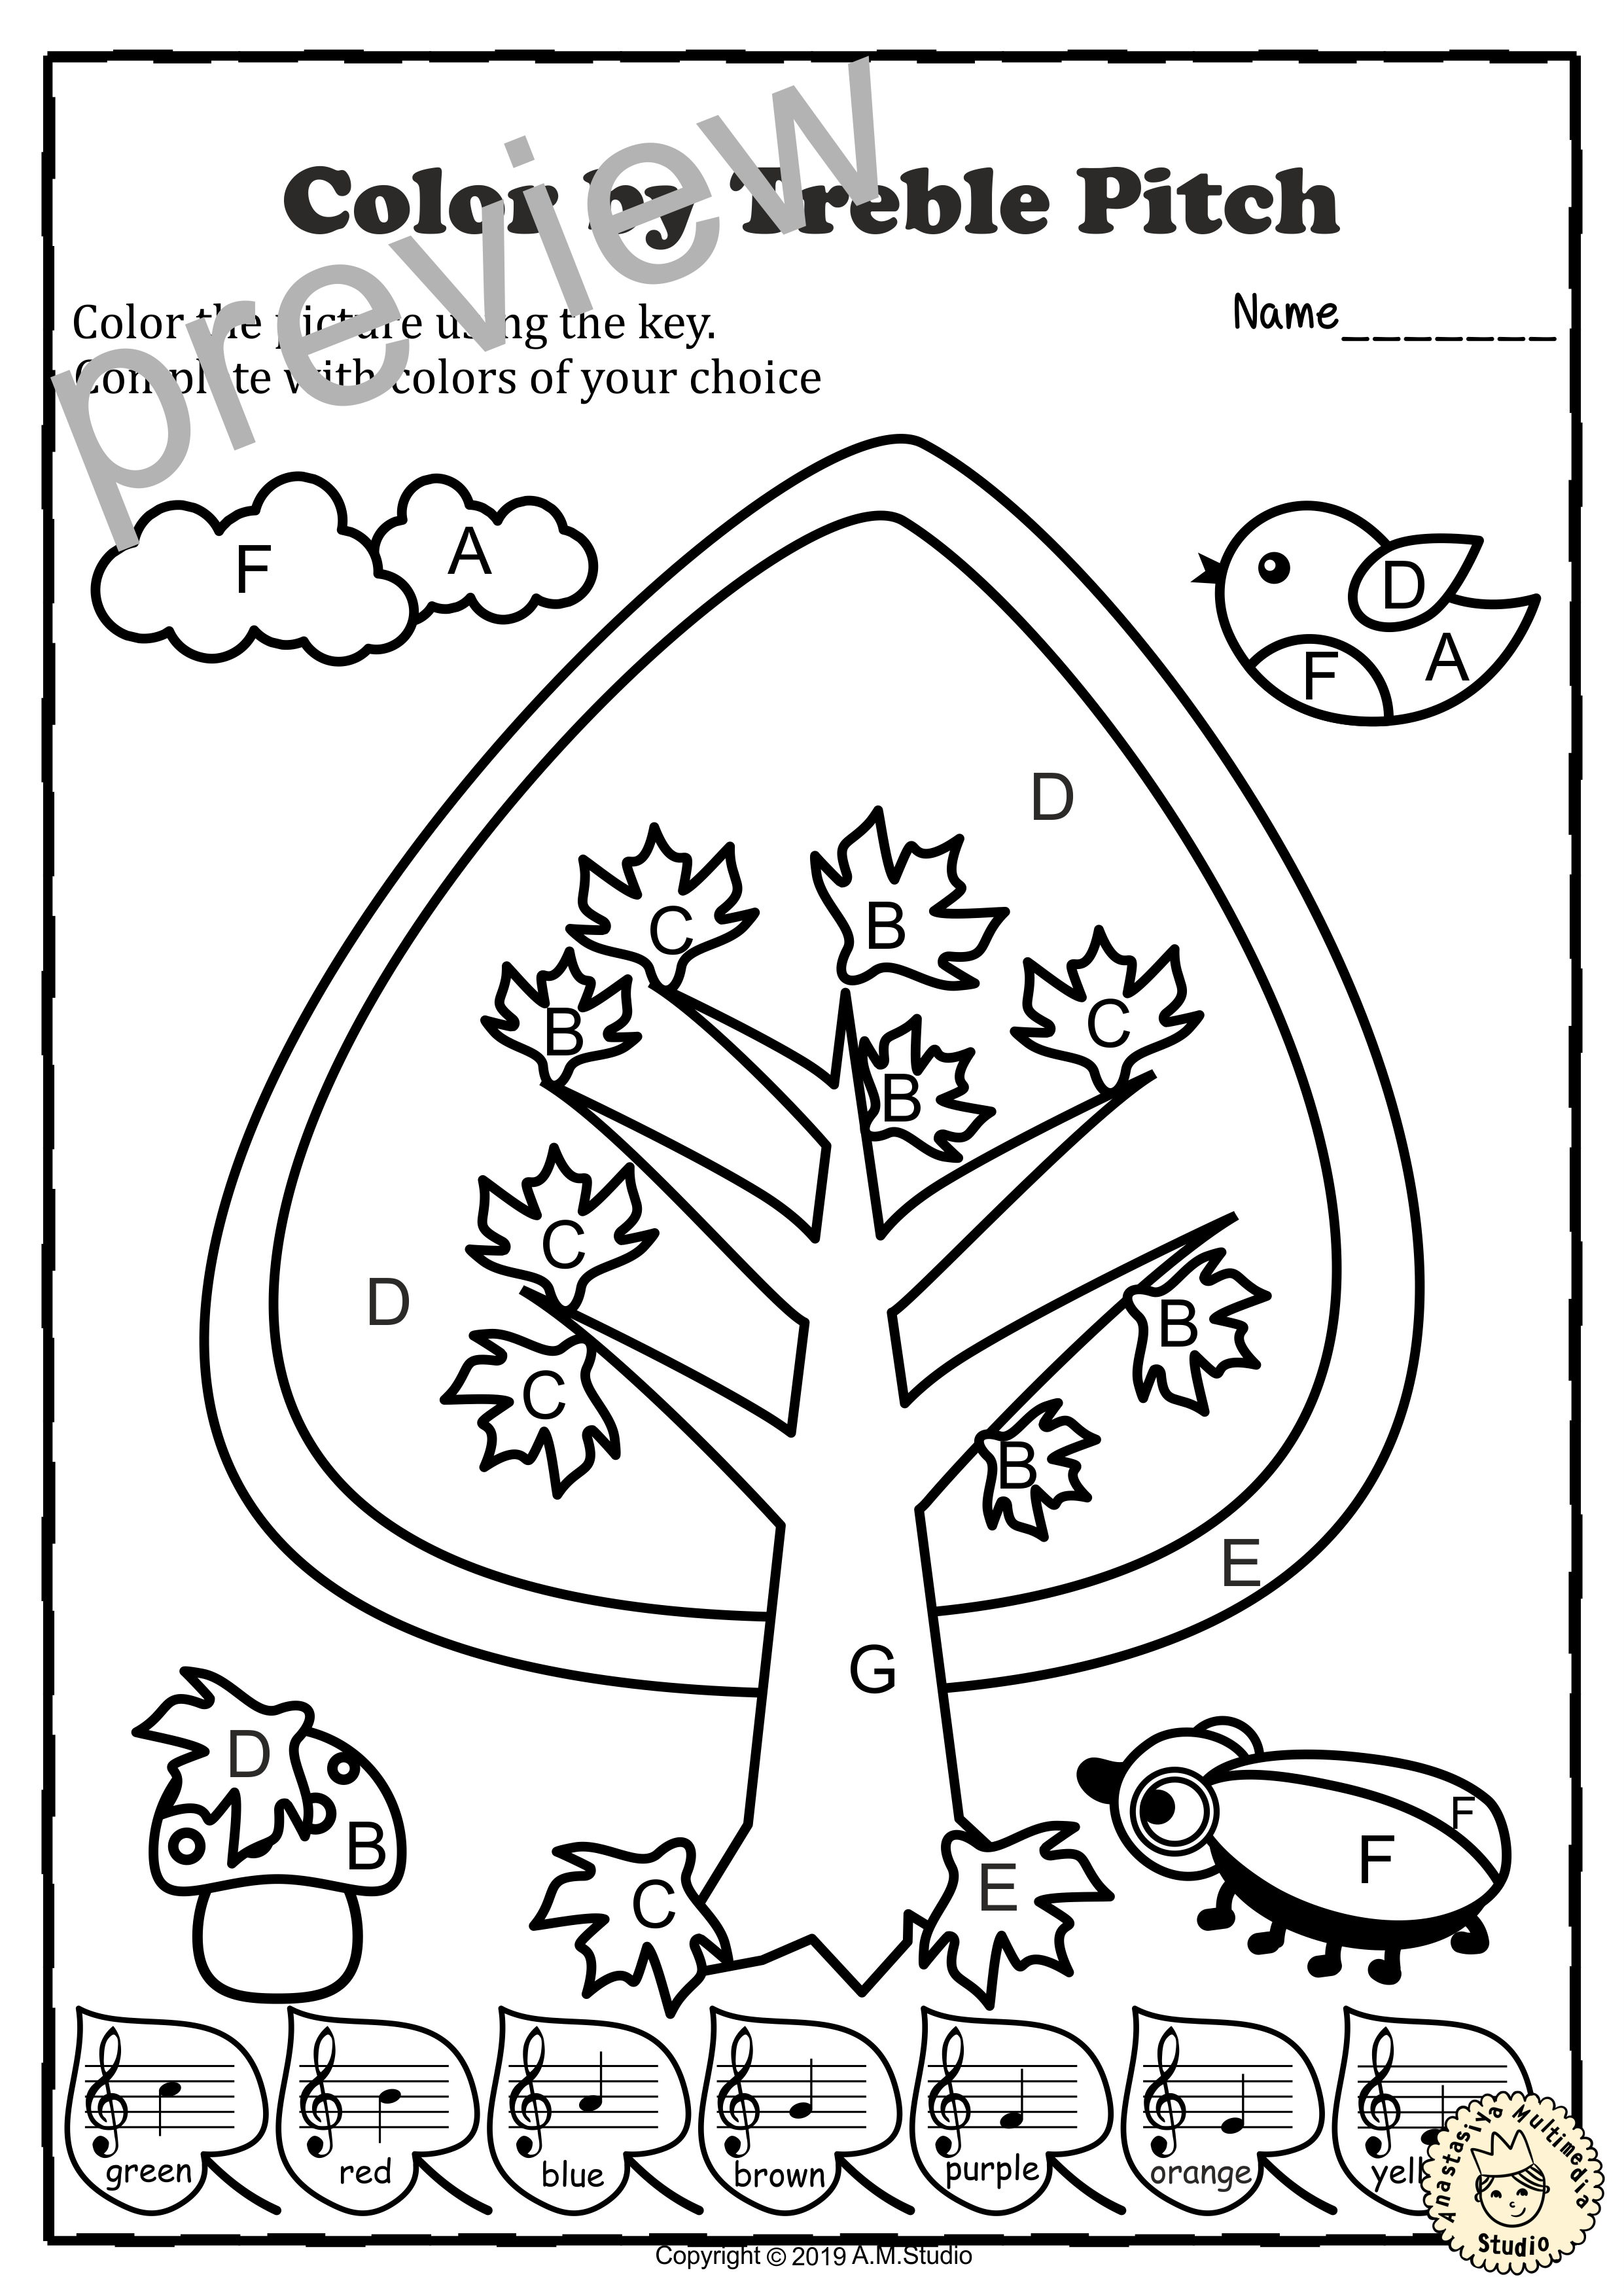 Musical Coloring Pages for Fall {Color by Treble Pitch} with answers (img # 2)